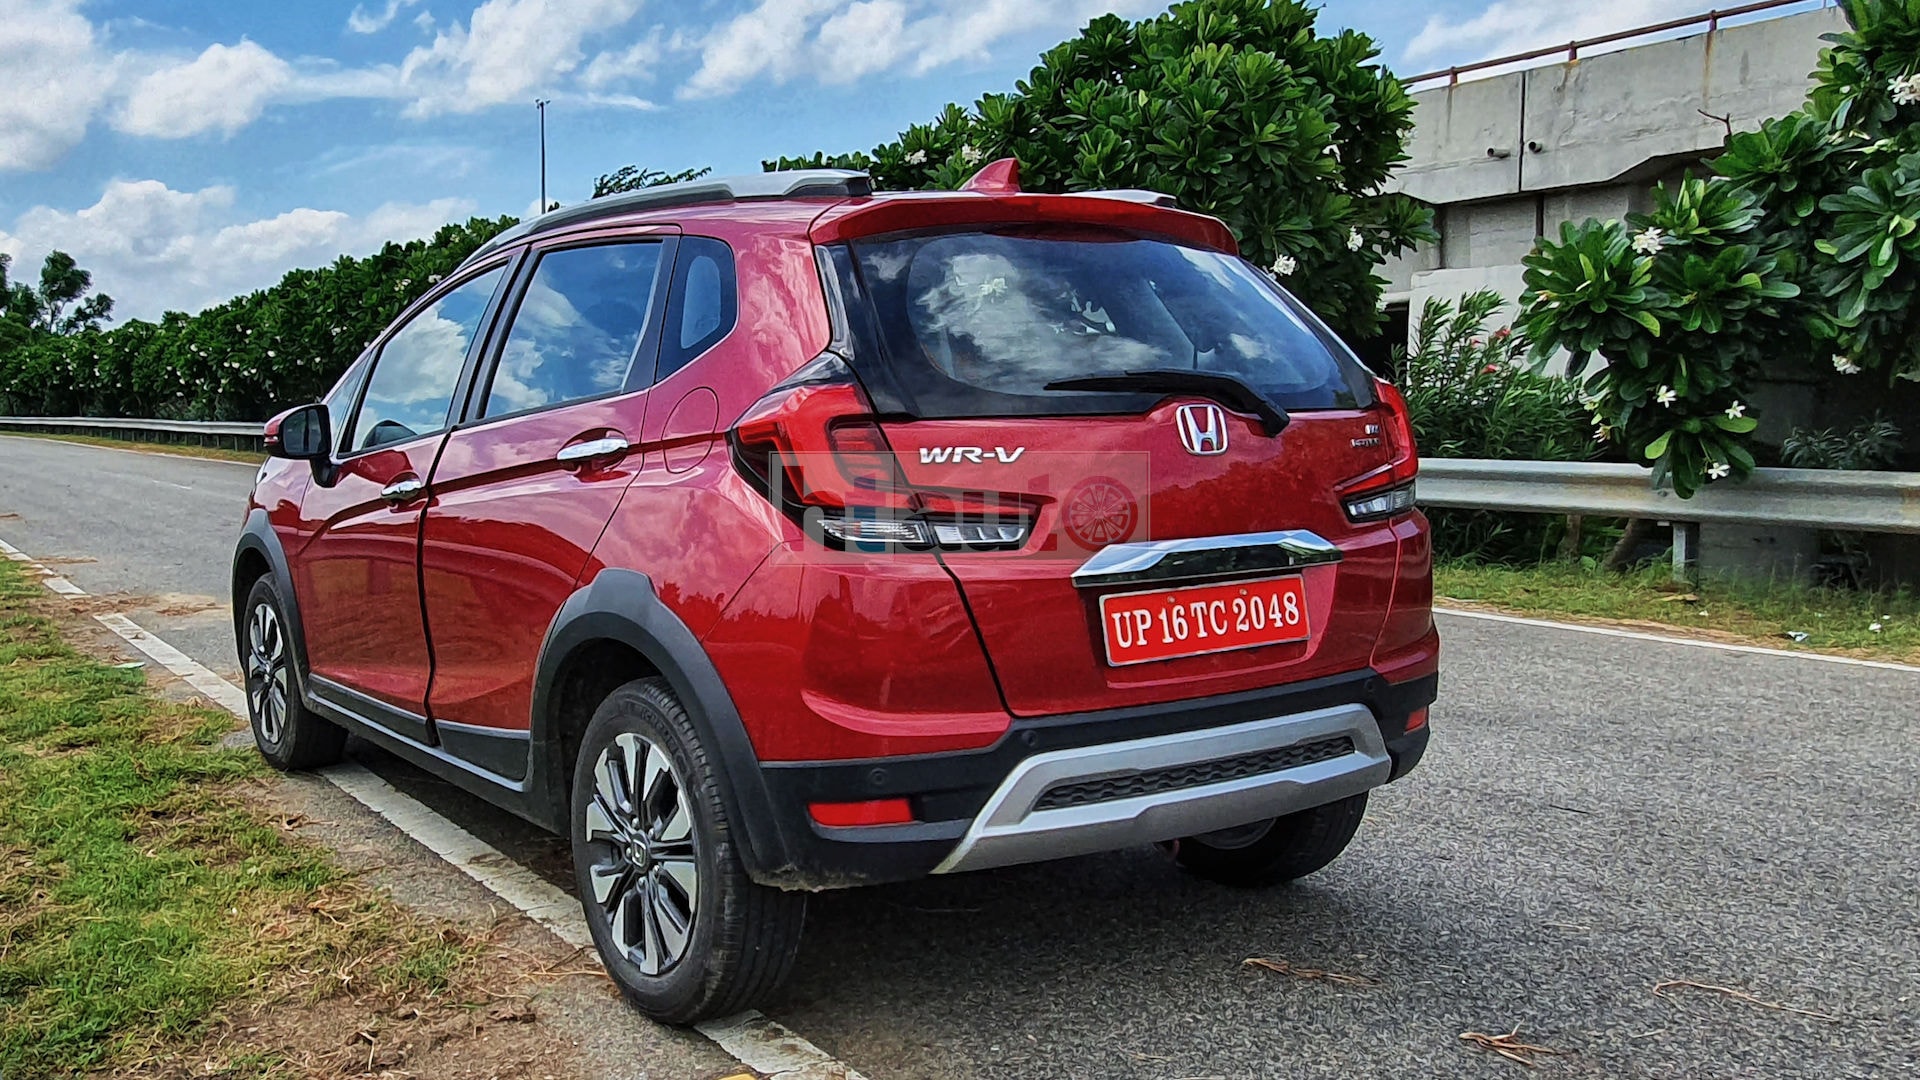 The WR-V continues to sit tall and has decent levels of ground clearance on offer. (Photo:HT Auto/Sabyasachi Dasgupta)